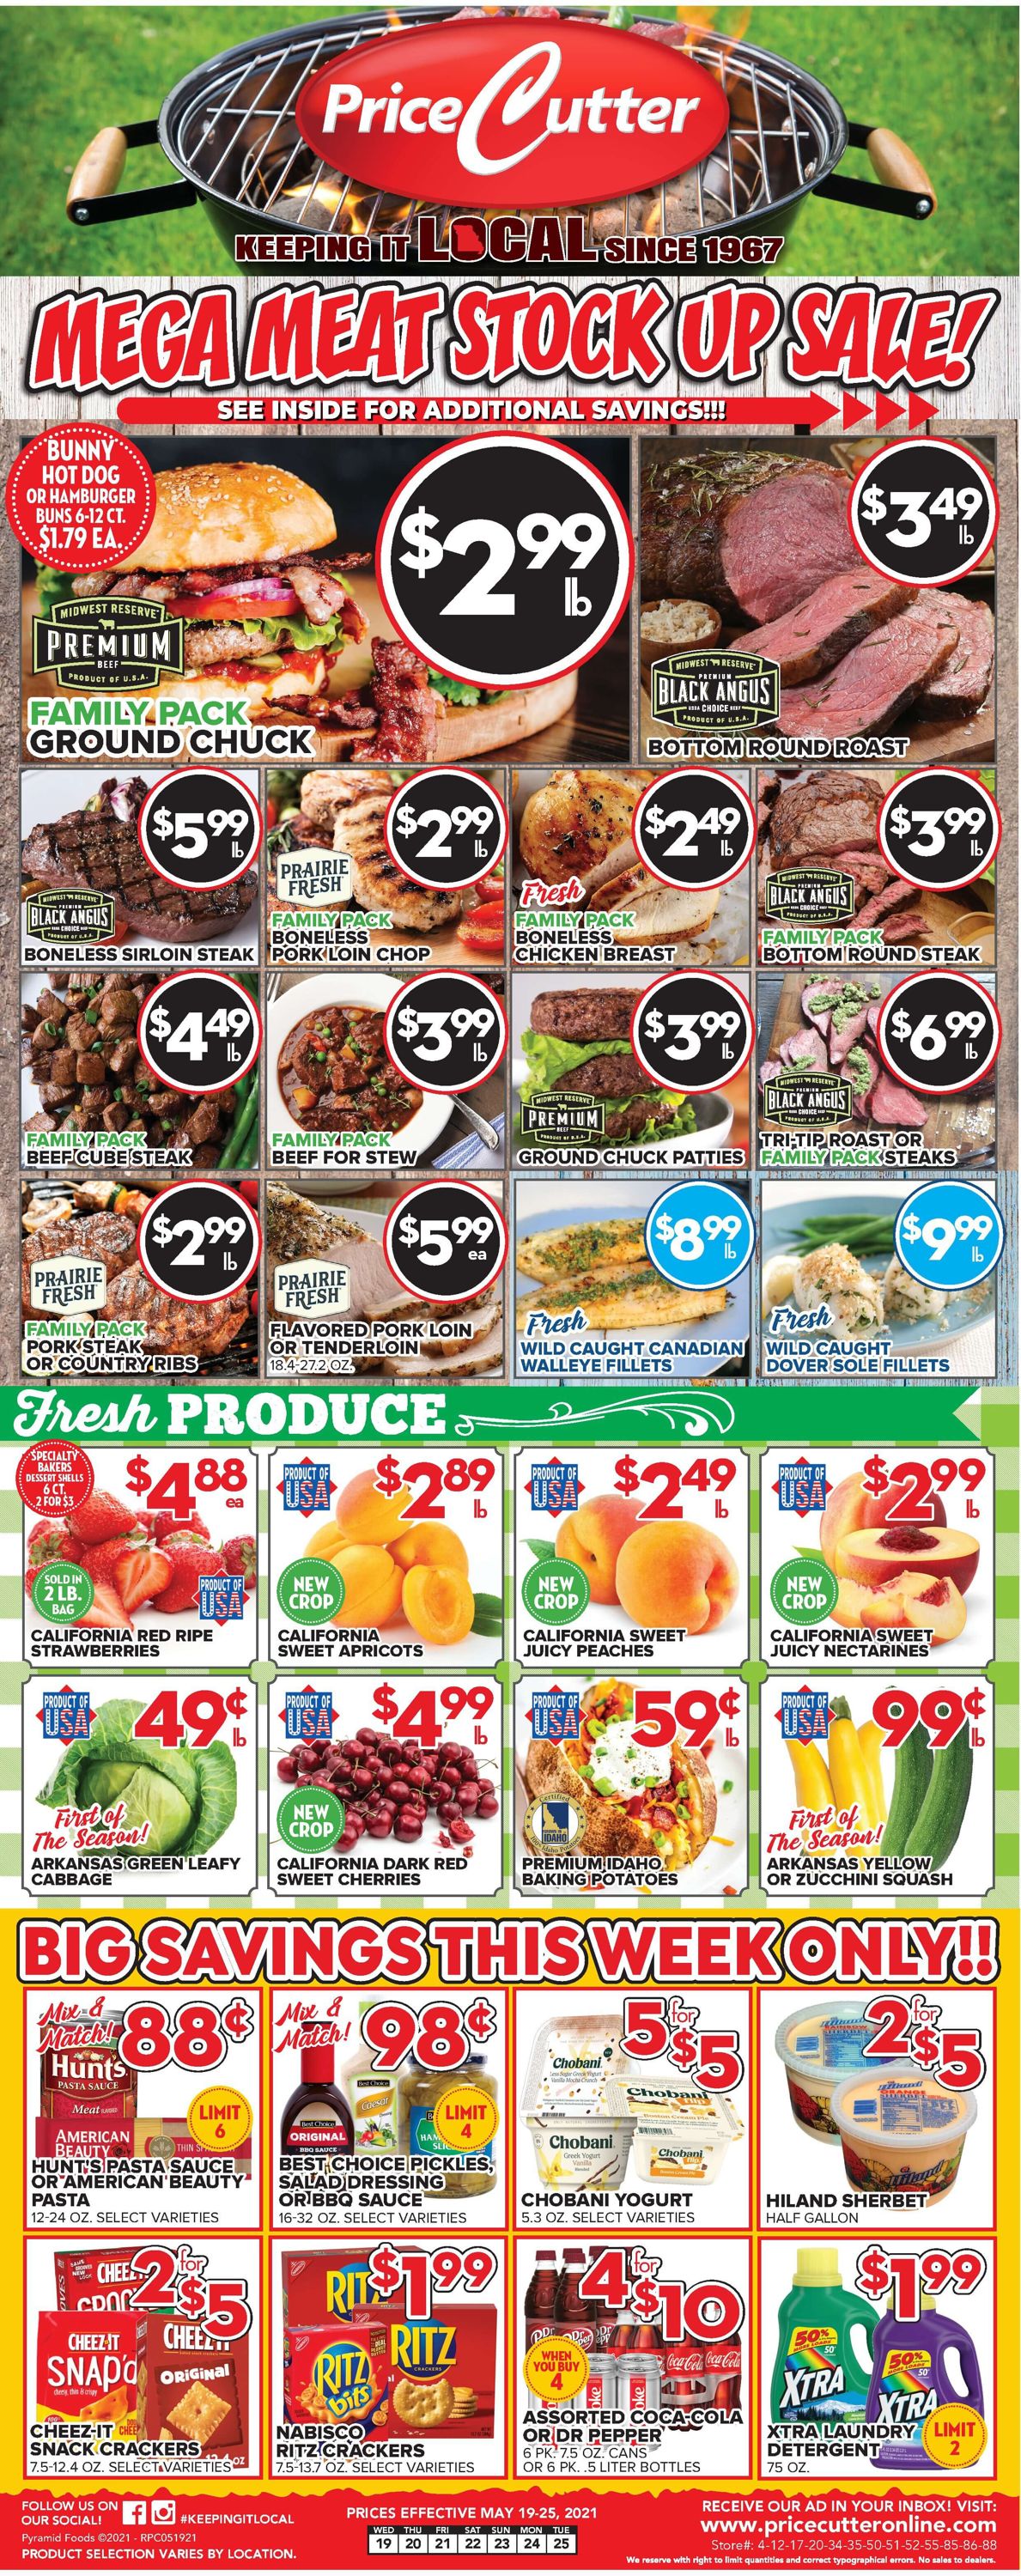 Price Cutter Weekly Ad Circular - valid 05/19-05/25/2021